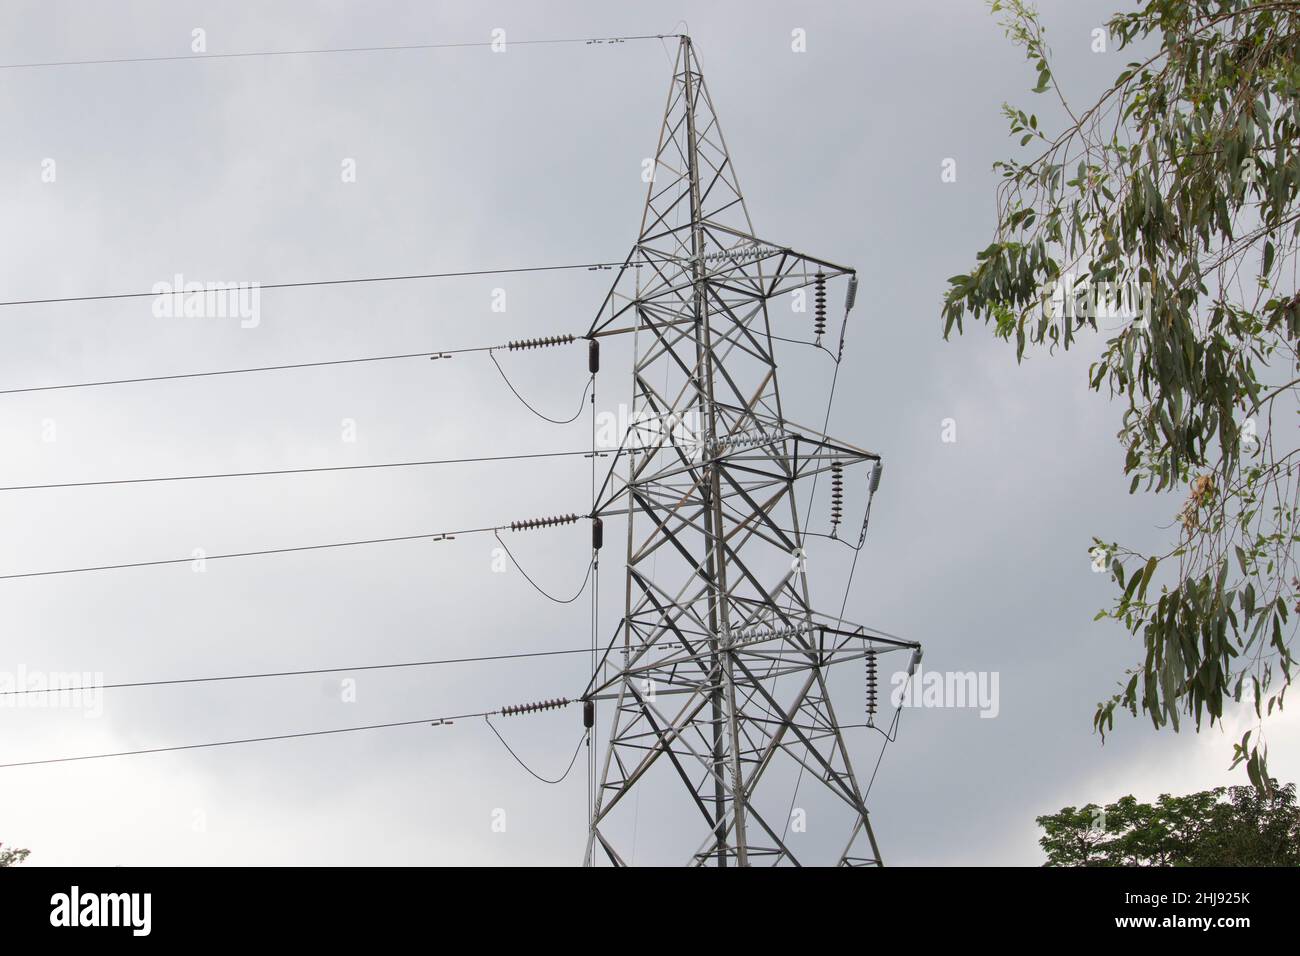 Electricity High voltage Line deliver electricity over long distances. Electric power transmission. Overhead power line. electric power transmission a Stock Photo